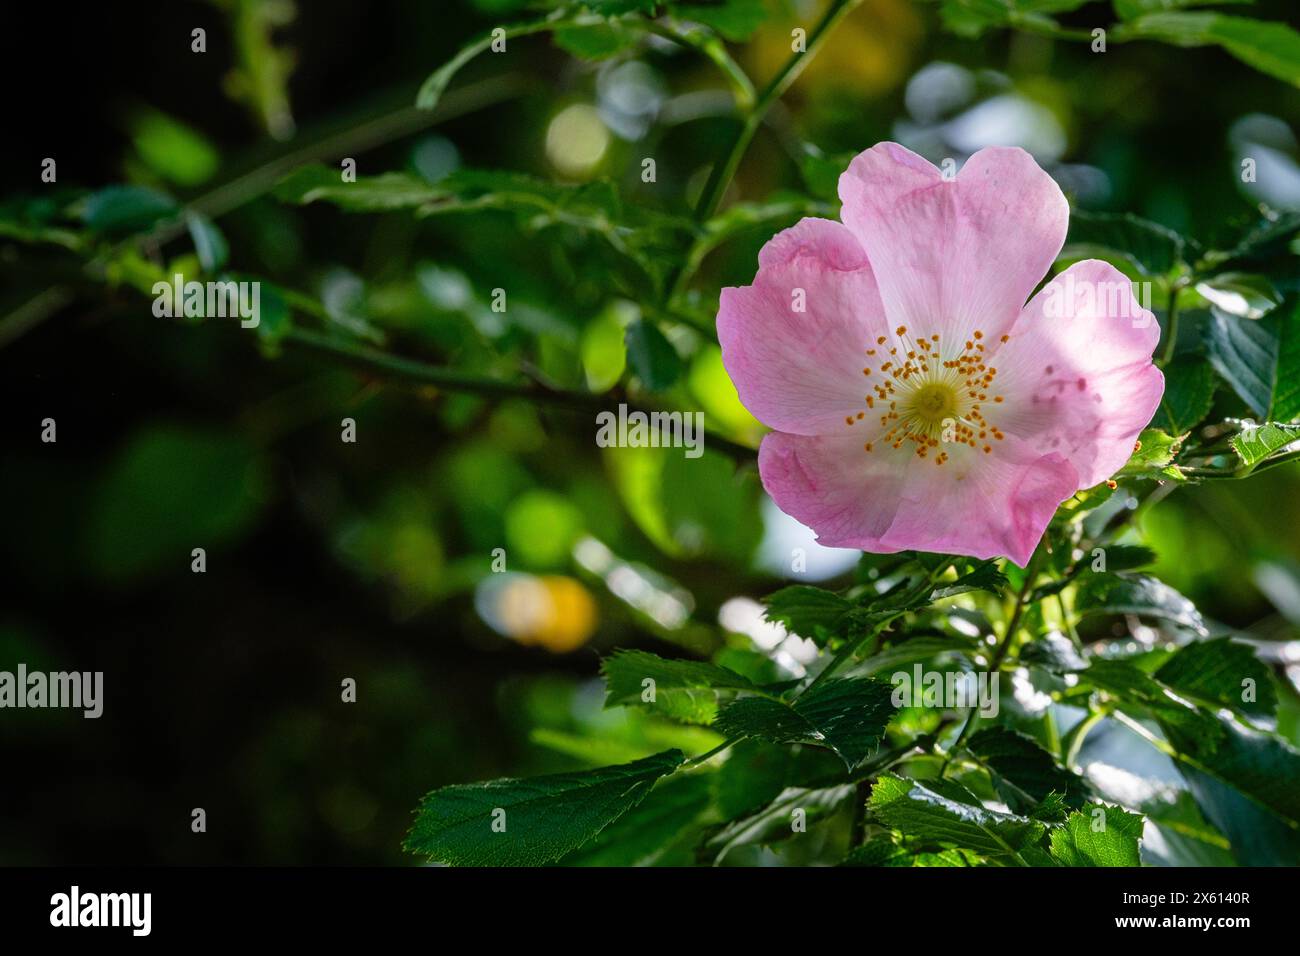 Pink rosehip flower amidst leaves. Stock Photo